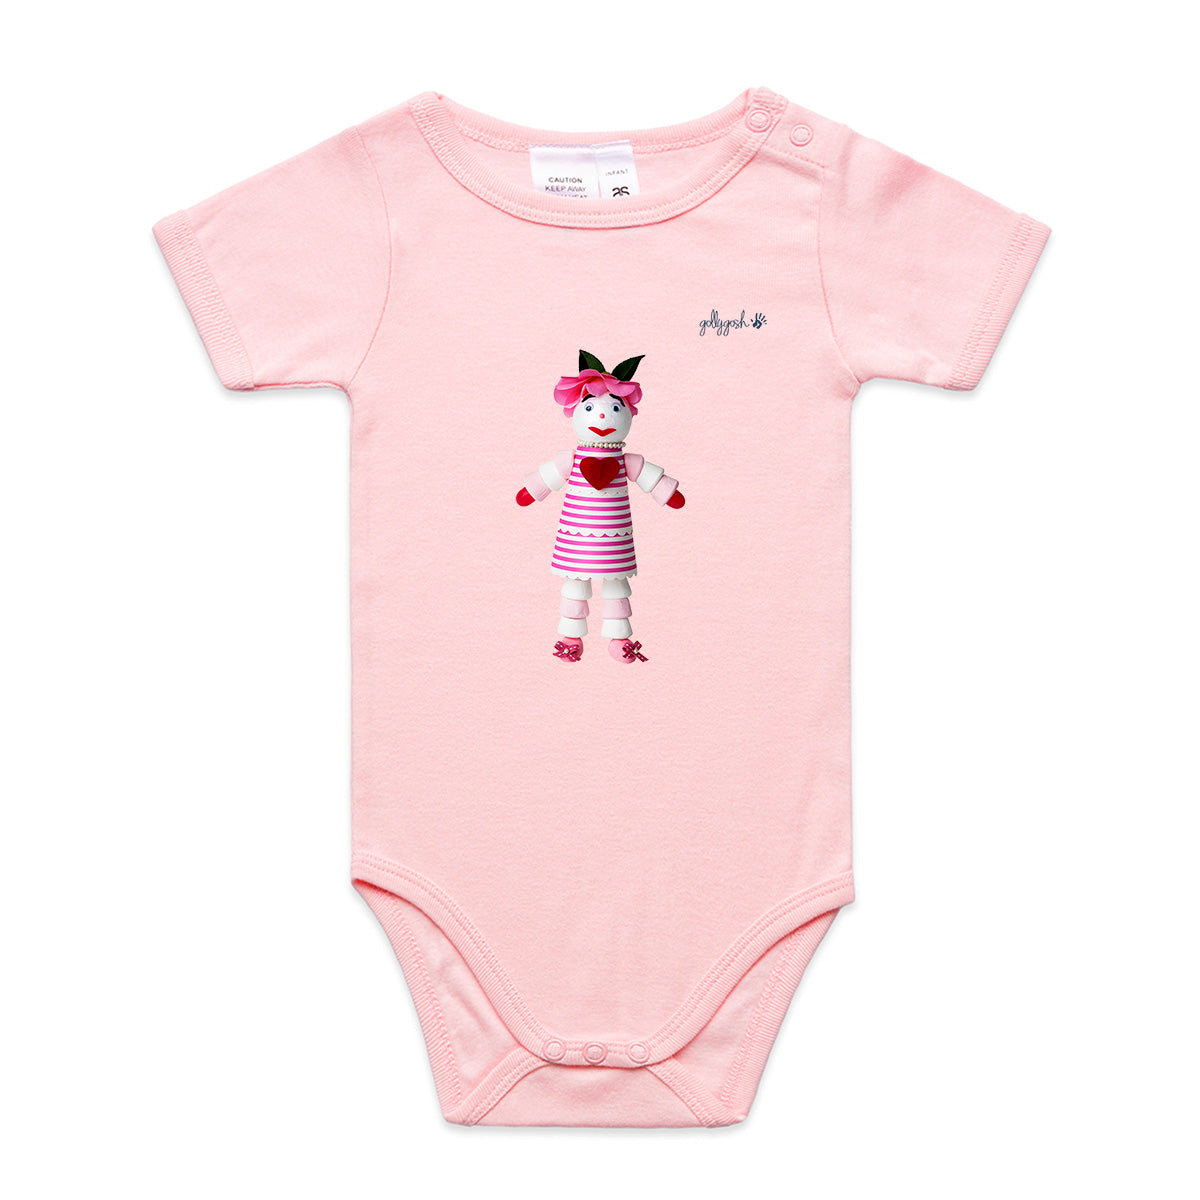 Marshmallow Doll - Infant Baby Grow